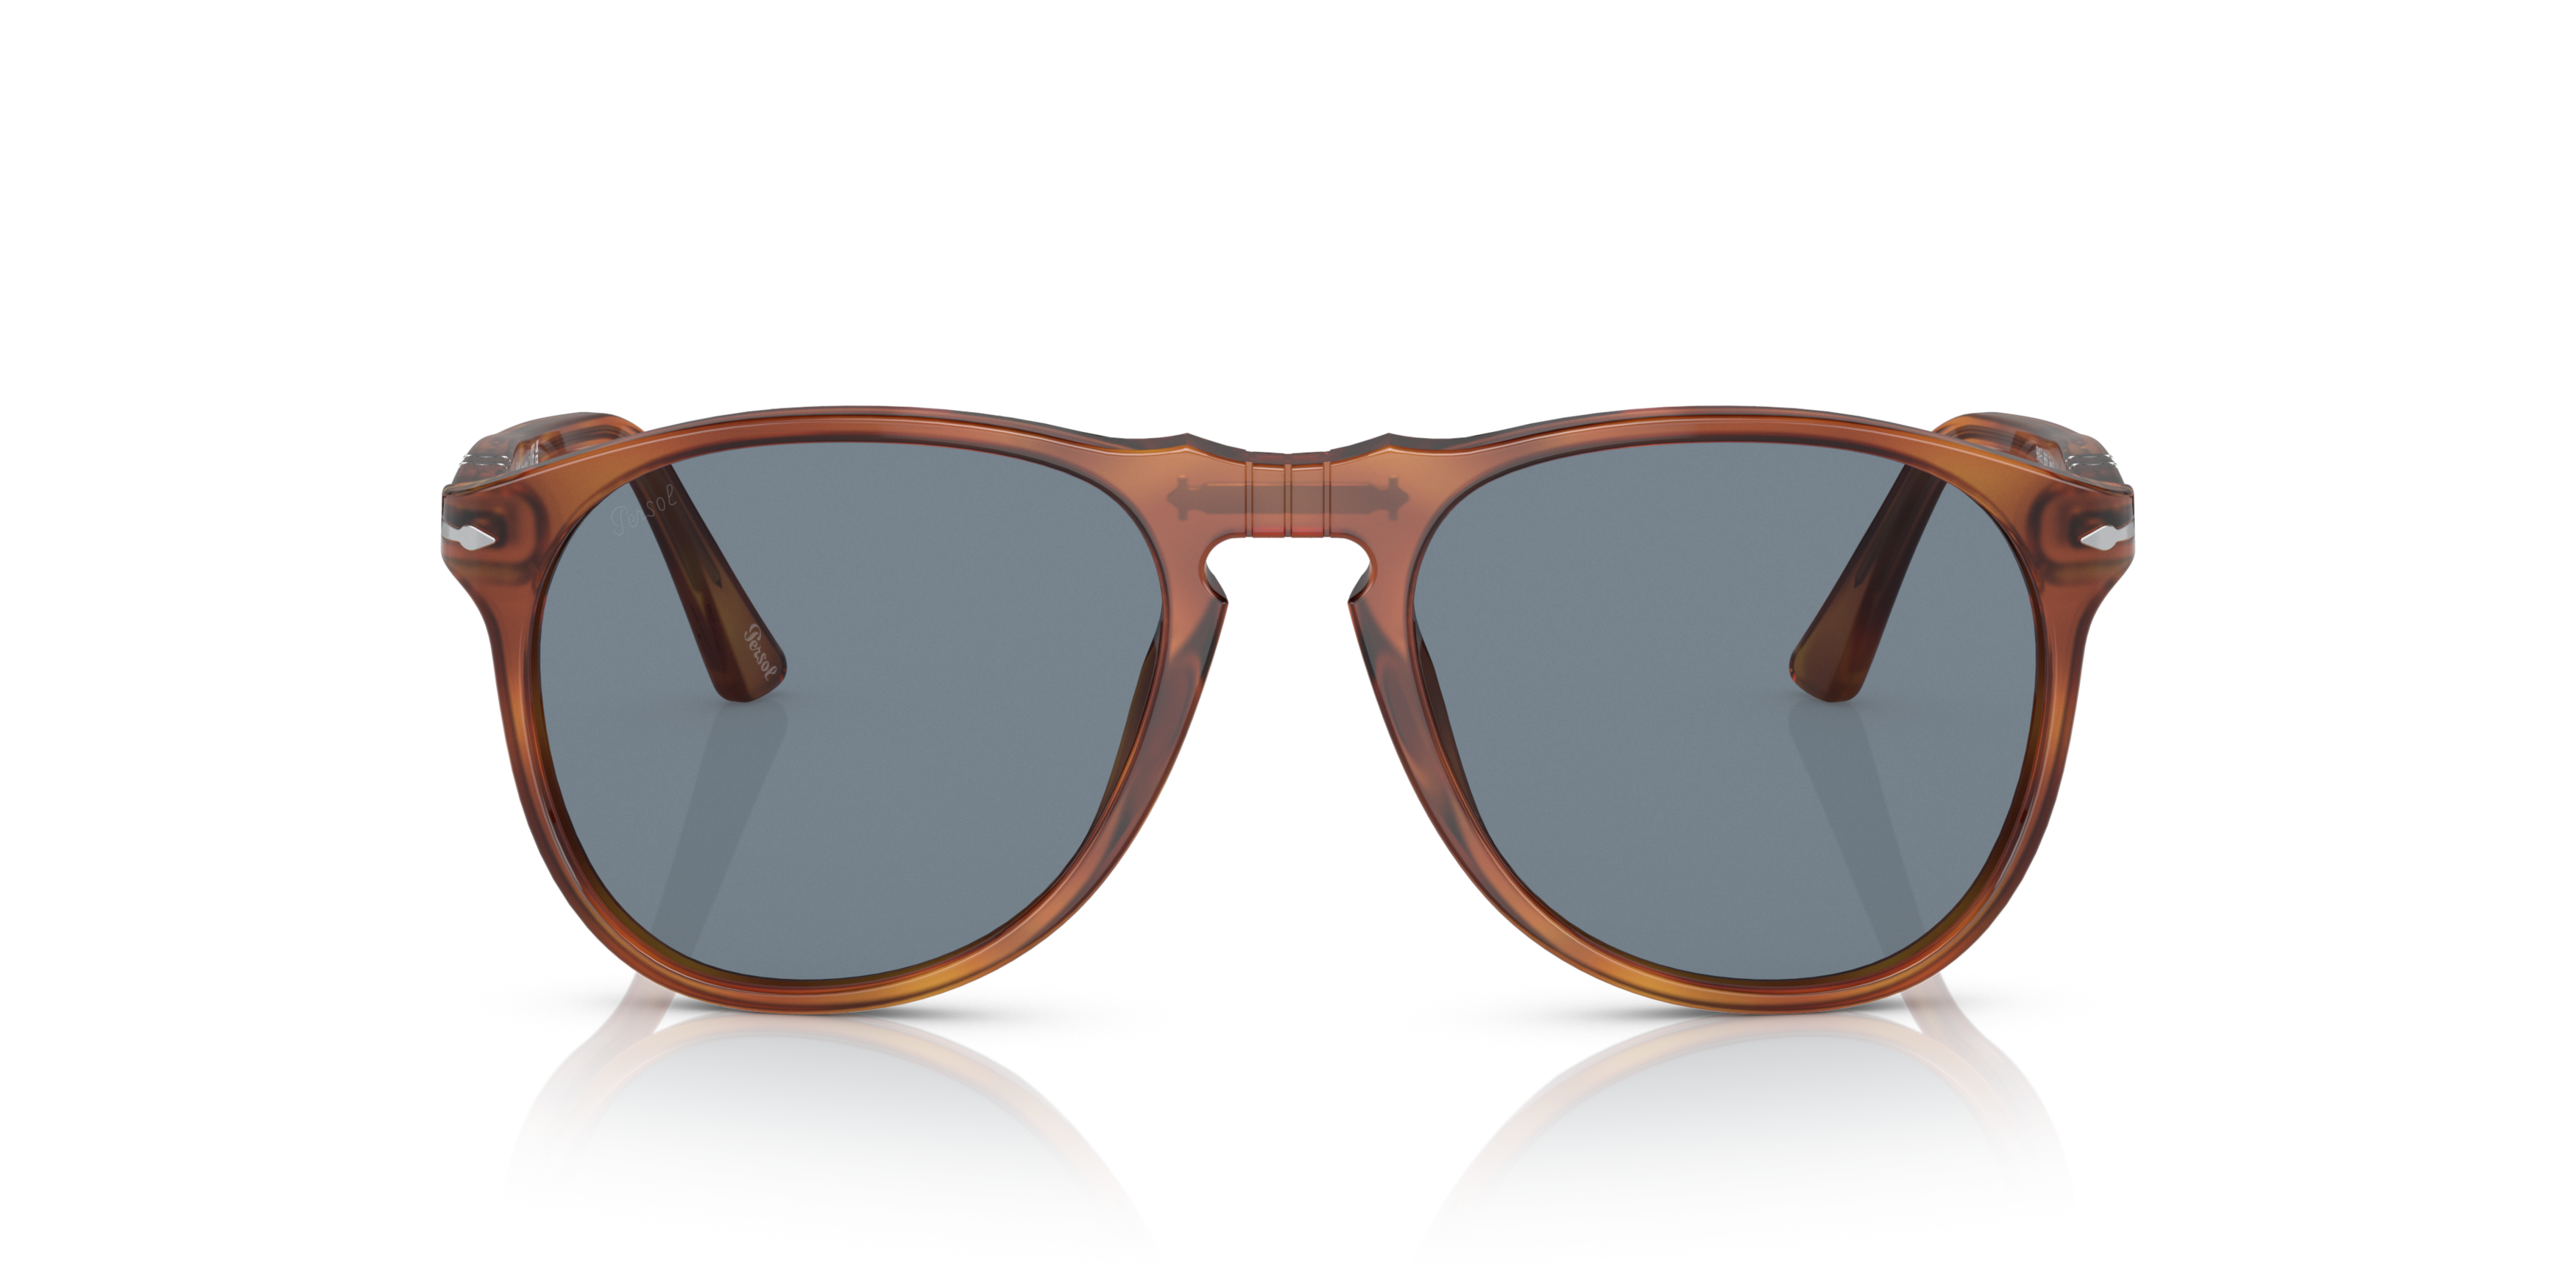 [products.image.front] Persol 0PO9649S 96/56